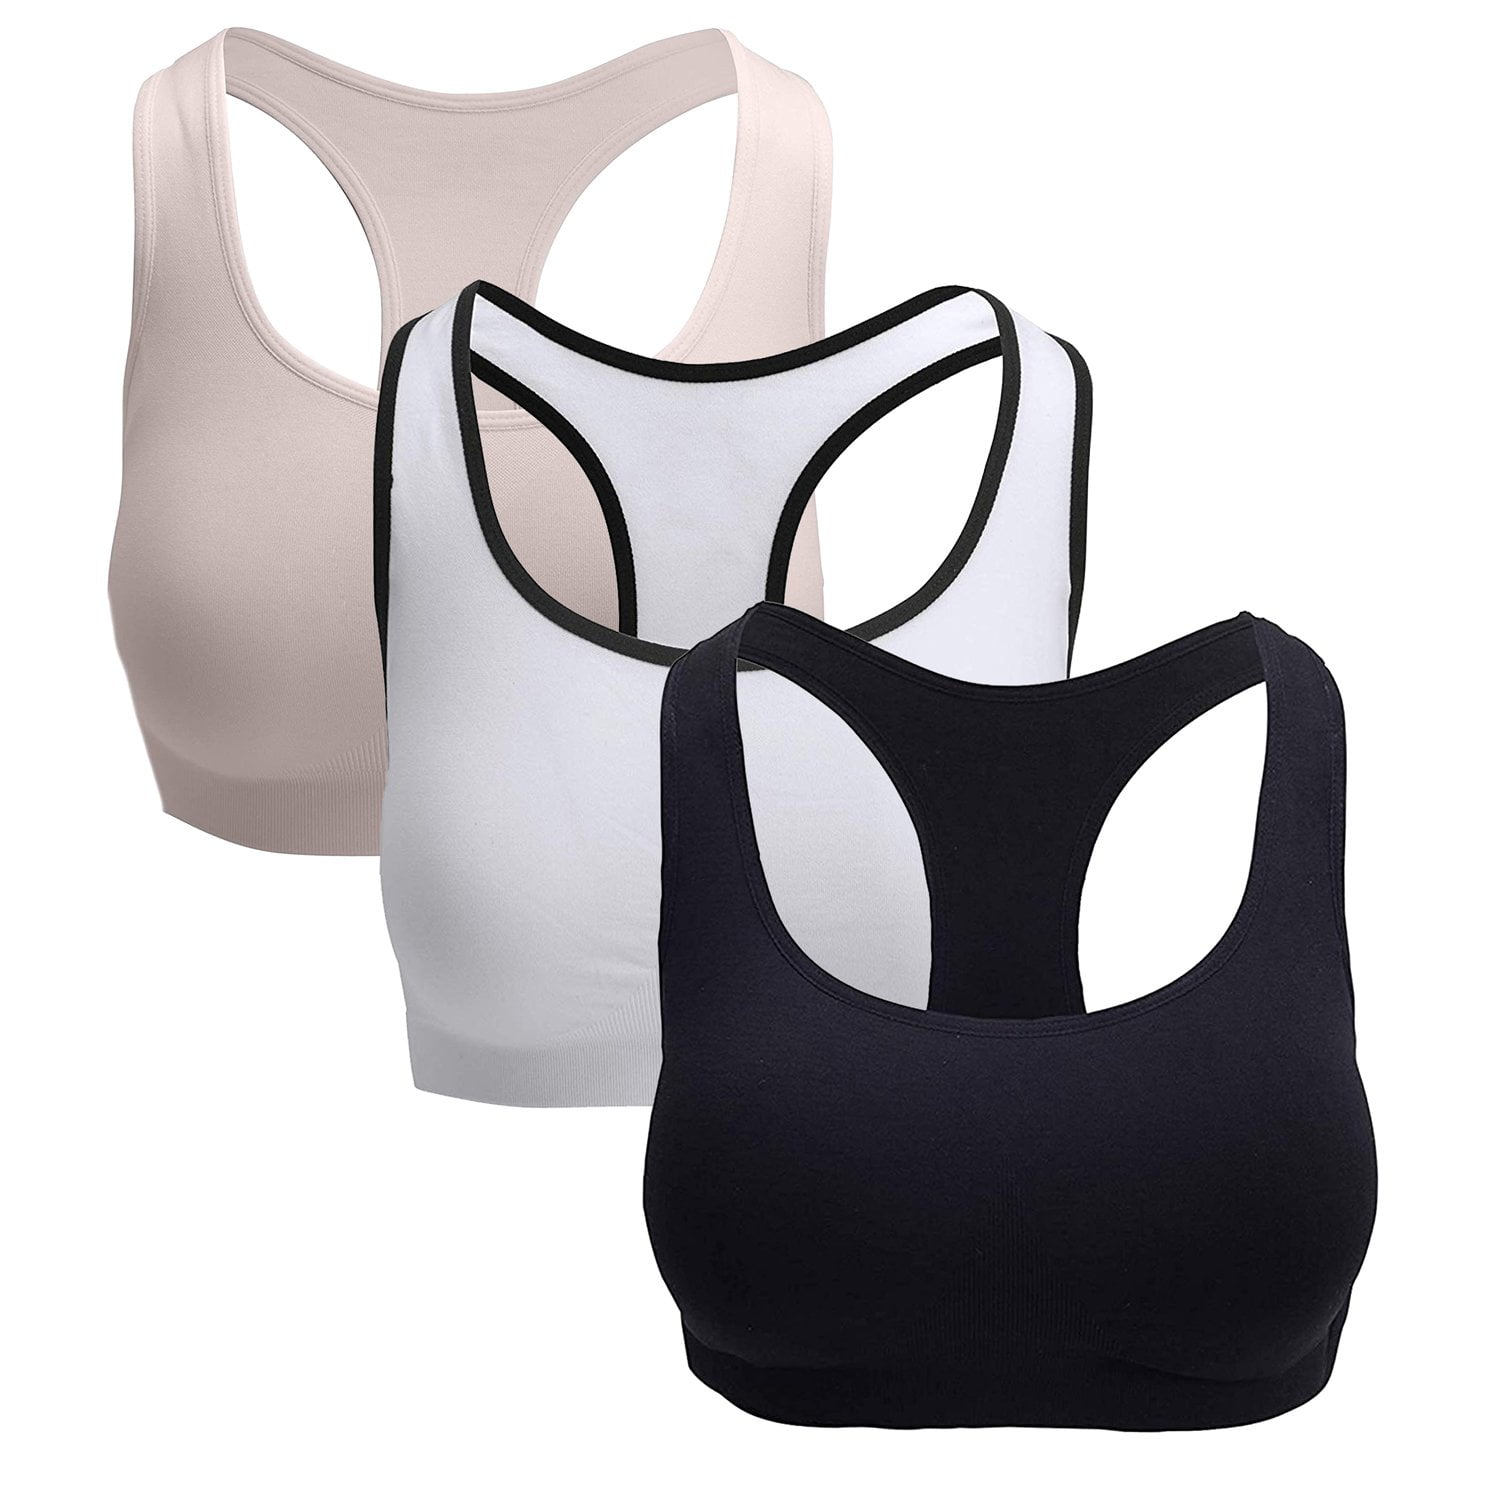 3 Pack Racerback Sports Bras Assorted Colors Removable Padded Seamless Activewear Fitness Bra 1467